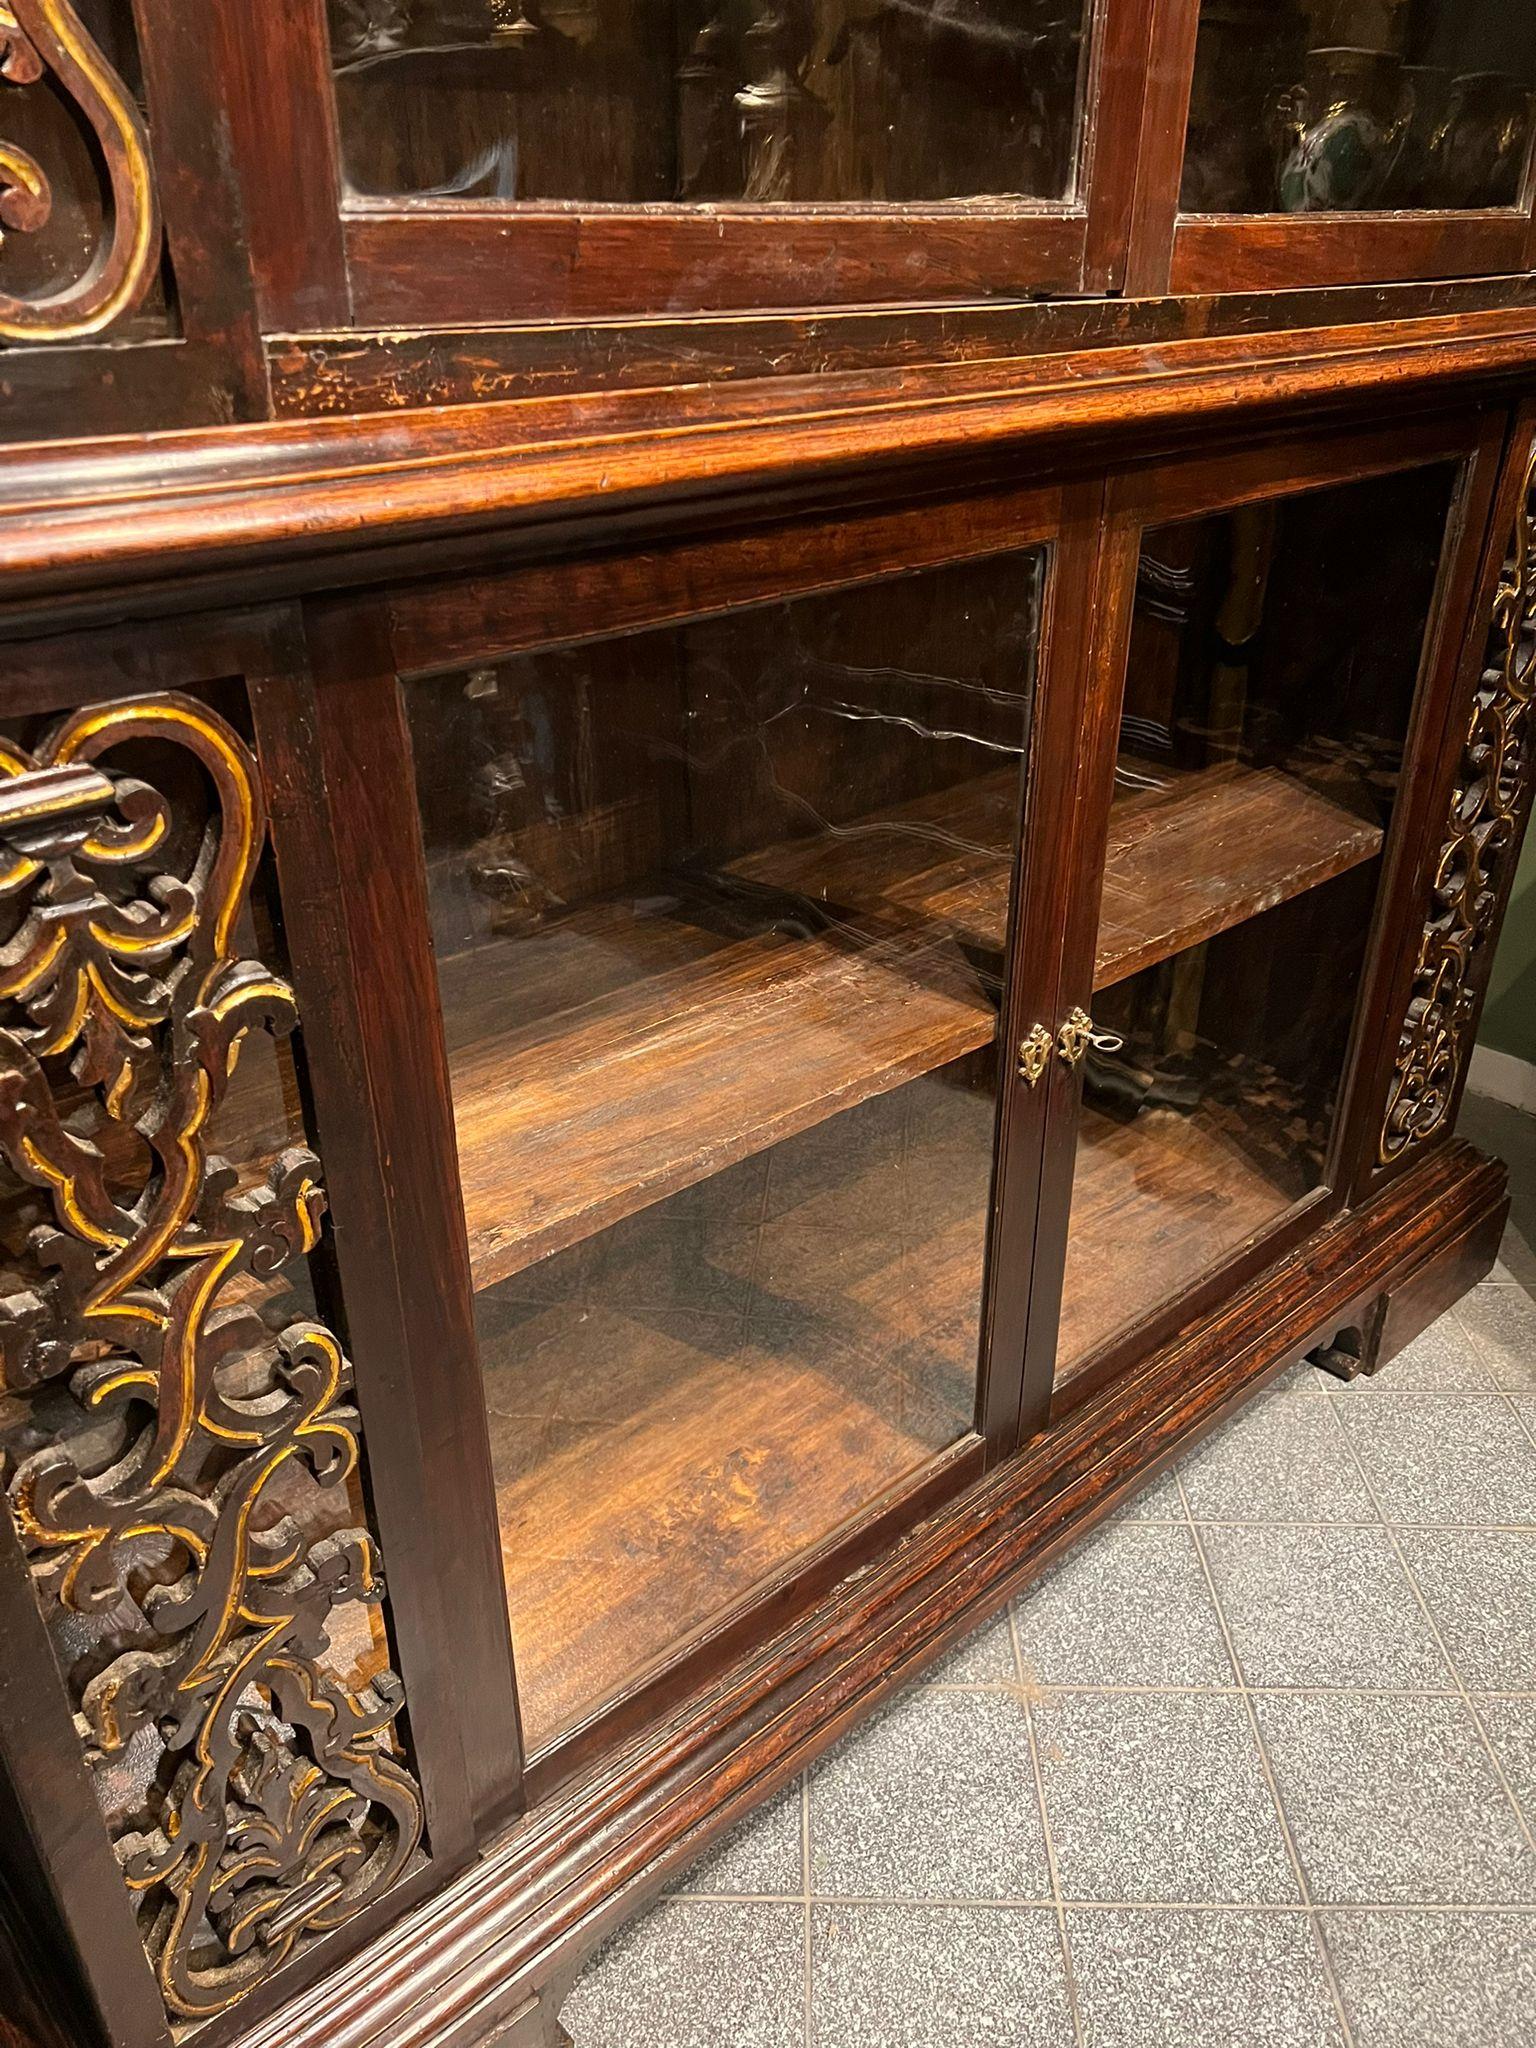 Splendid bookcase dating from the late 18th or early 19th century, featuring a rich artistic style typical of church and convent furnishings. The cabinet shows special attention to the carved and gilded details that adorn the side pillars and the